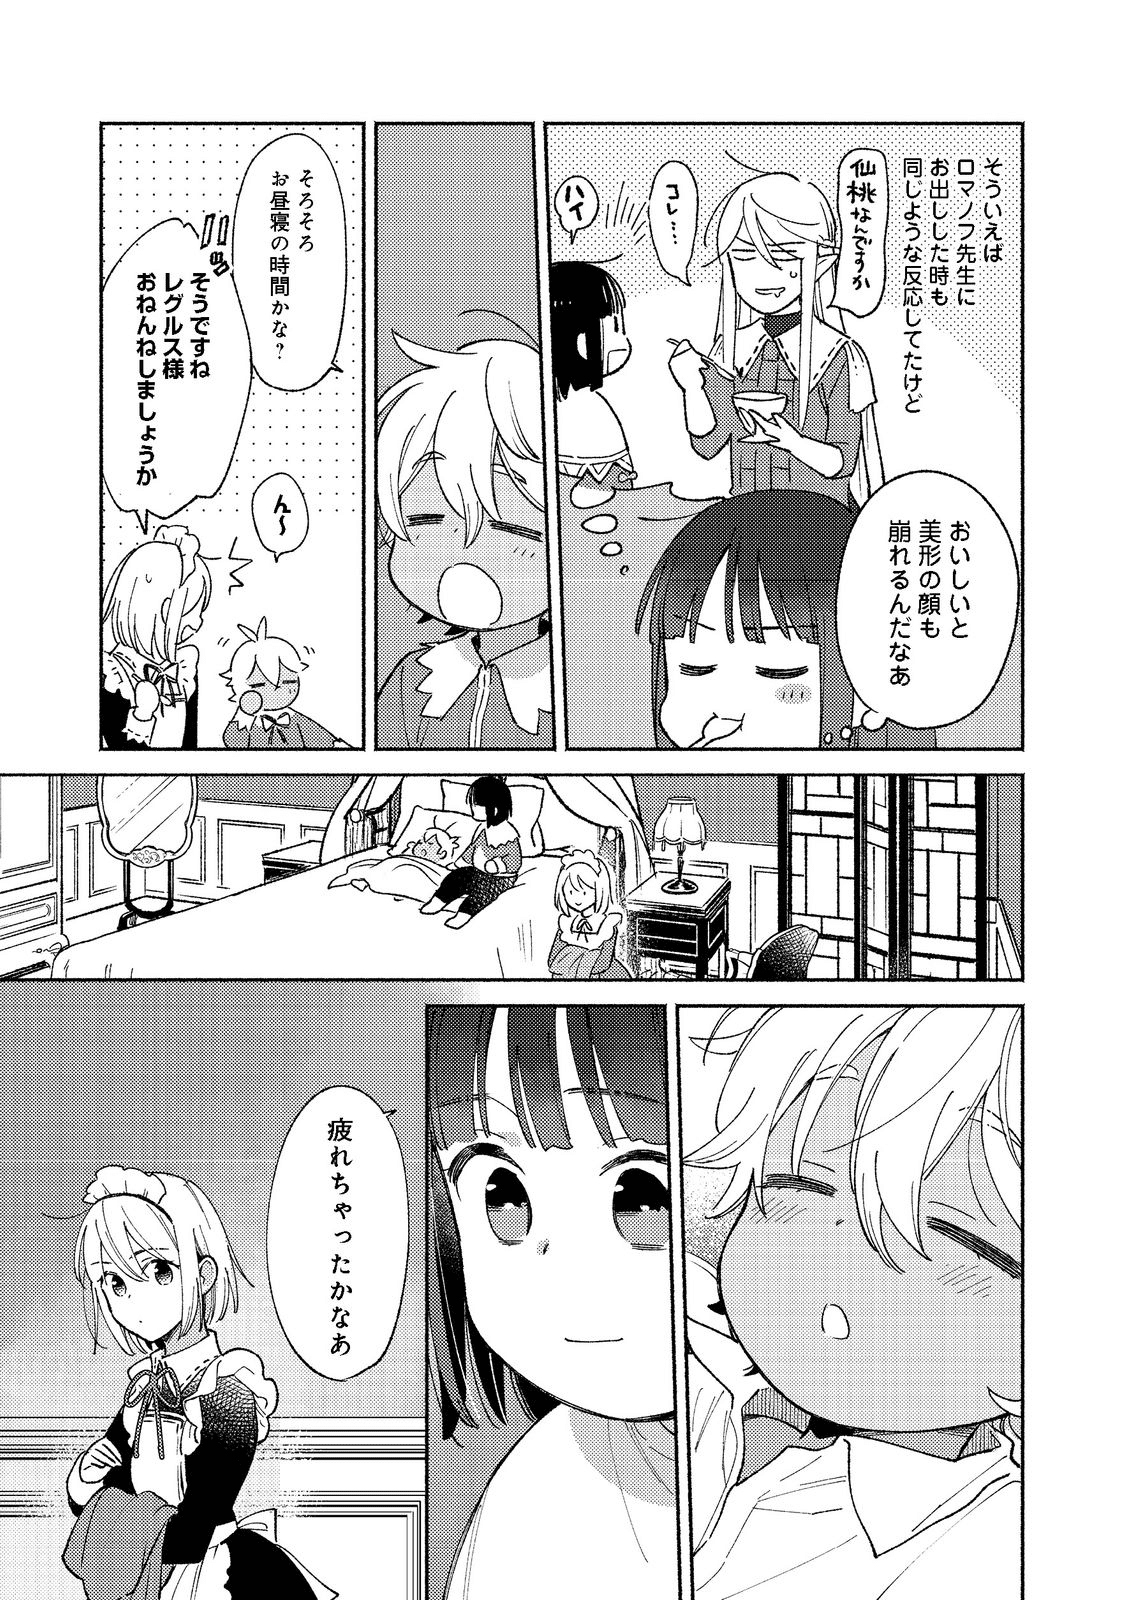 I’m the White Pig Nobleman 第14.2話 - Page 3